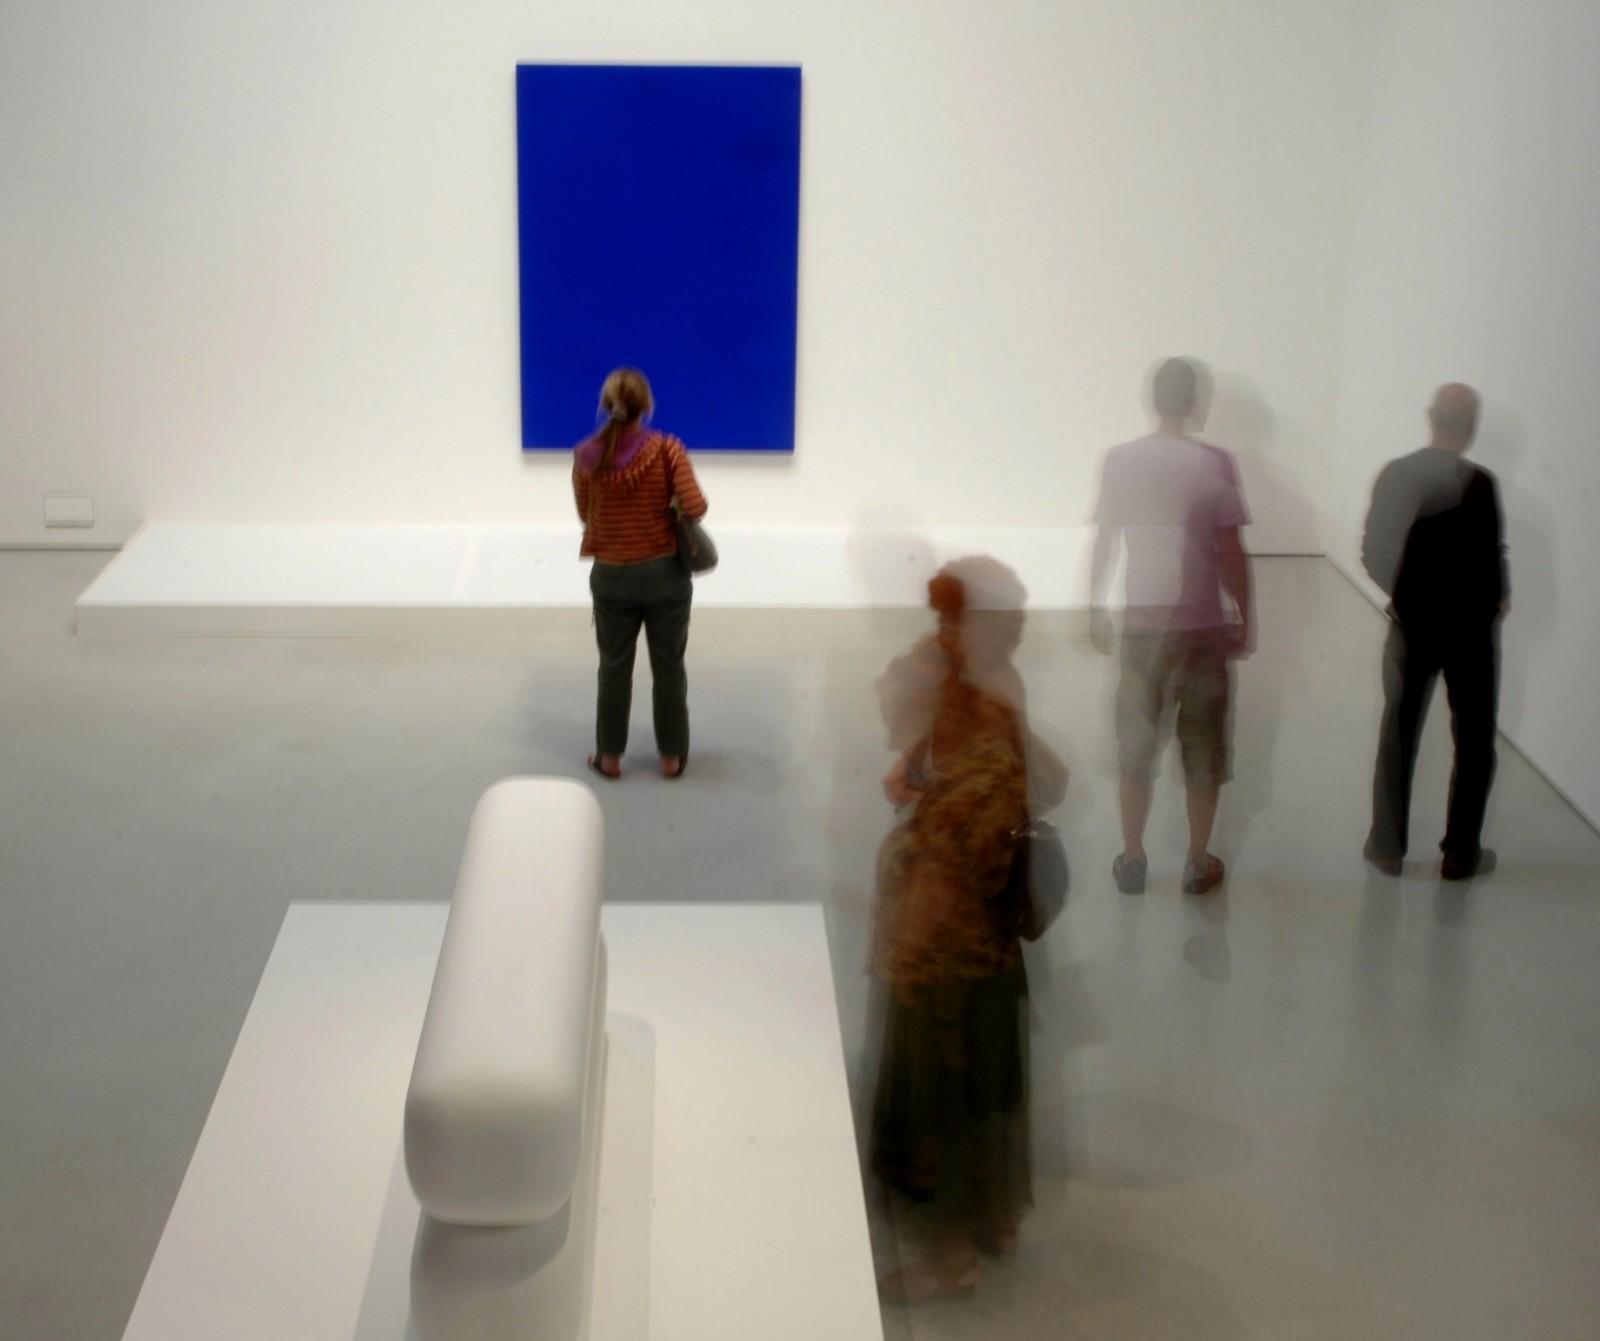 View of the exhibition, "Colour after Klein", Barbican Art Gallery, 2005